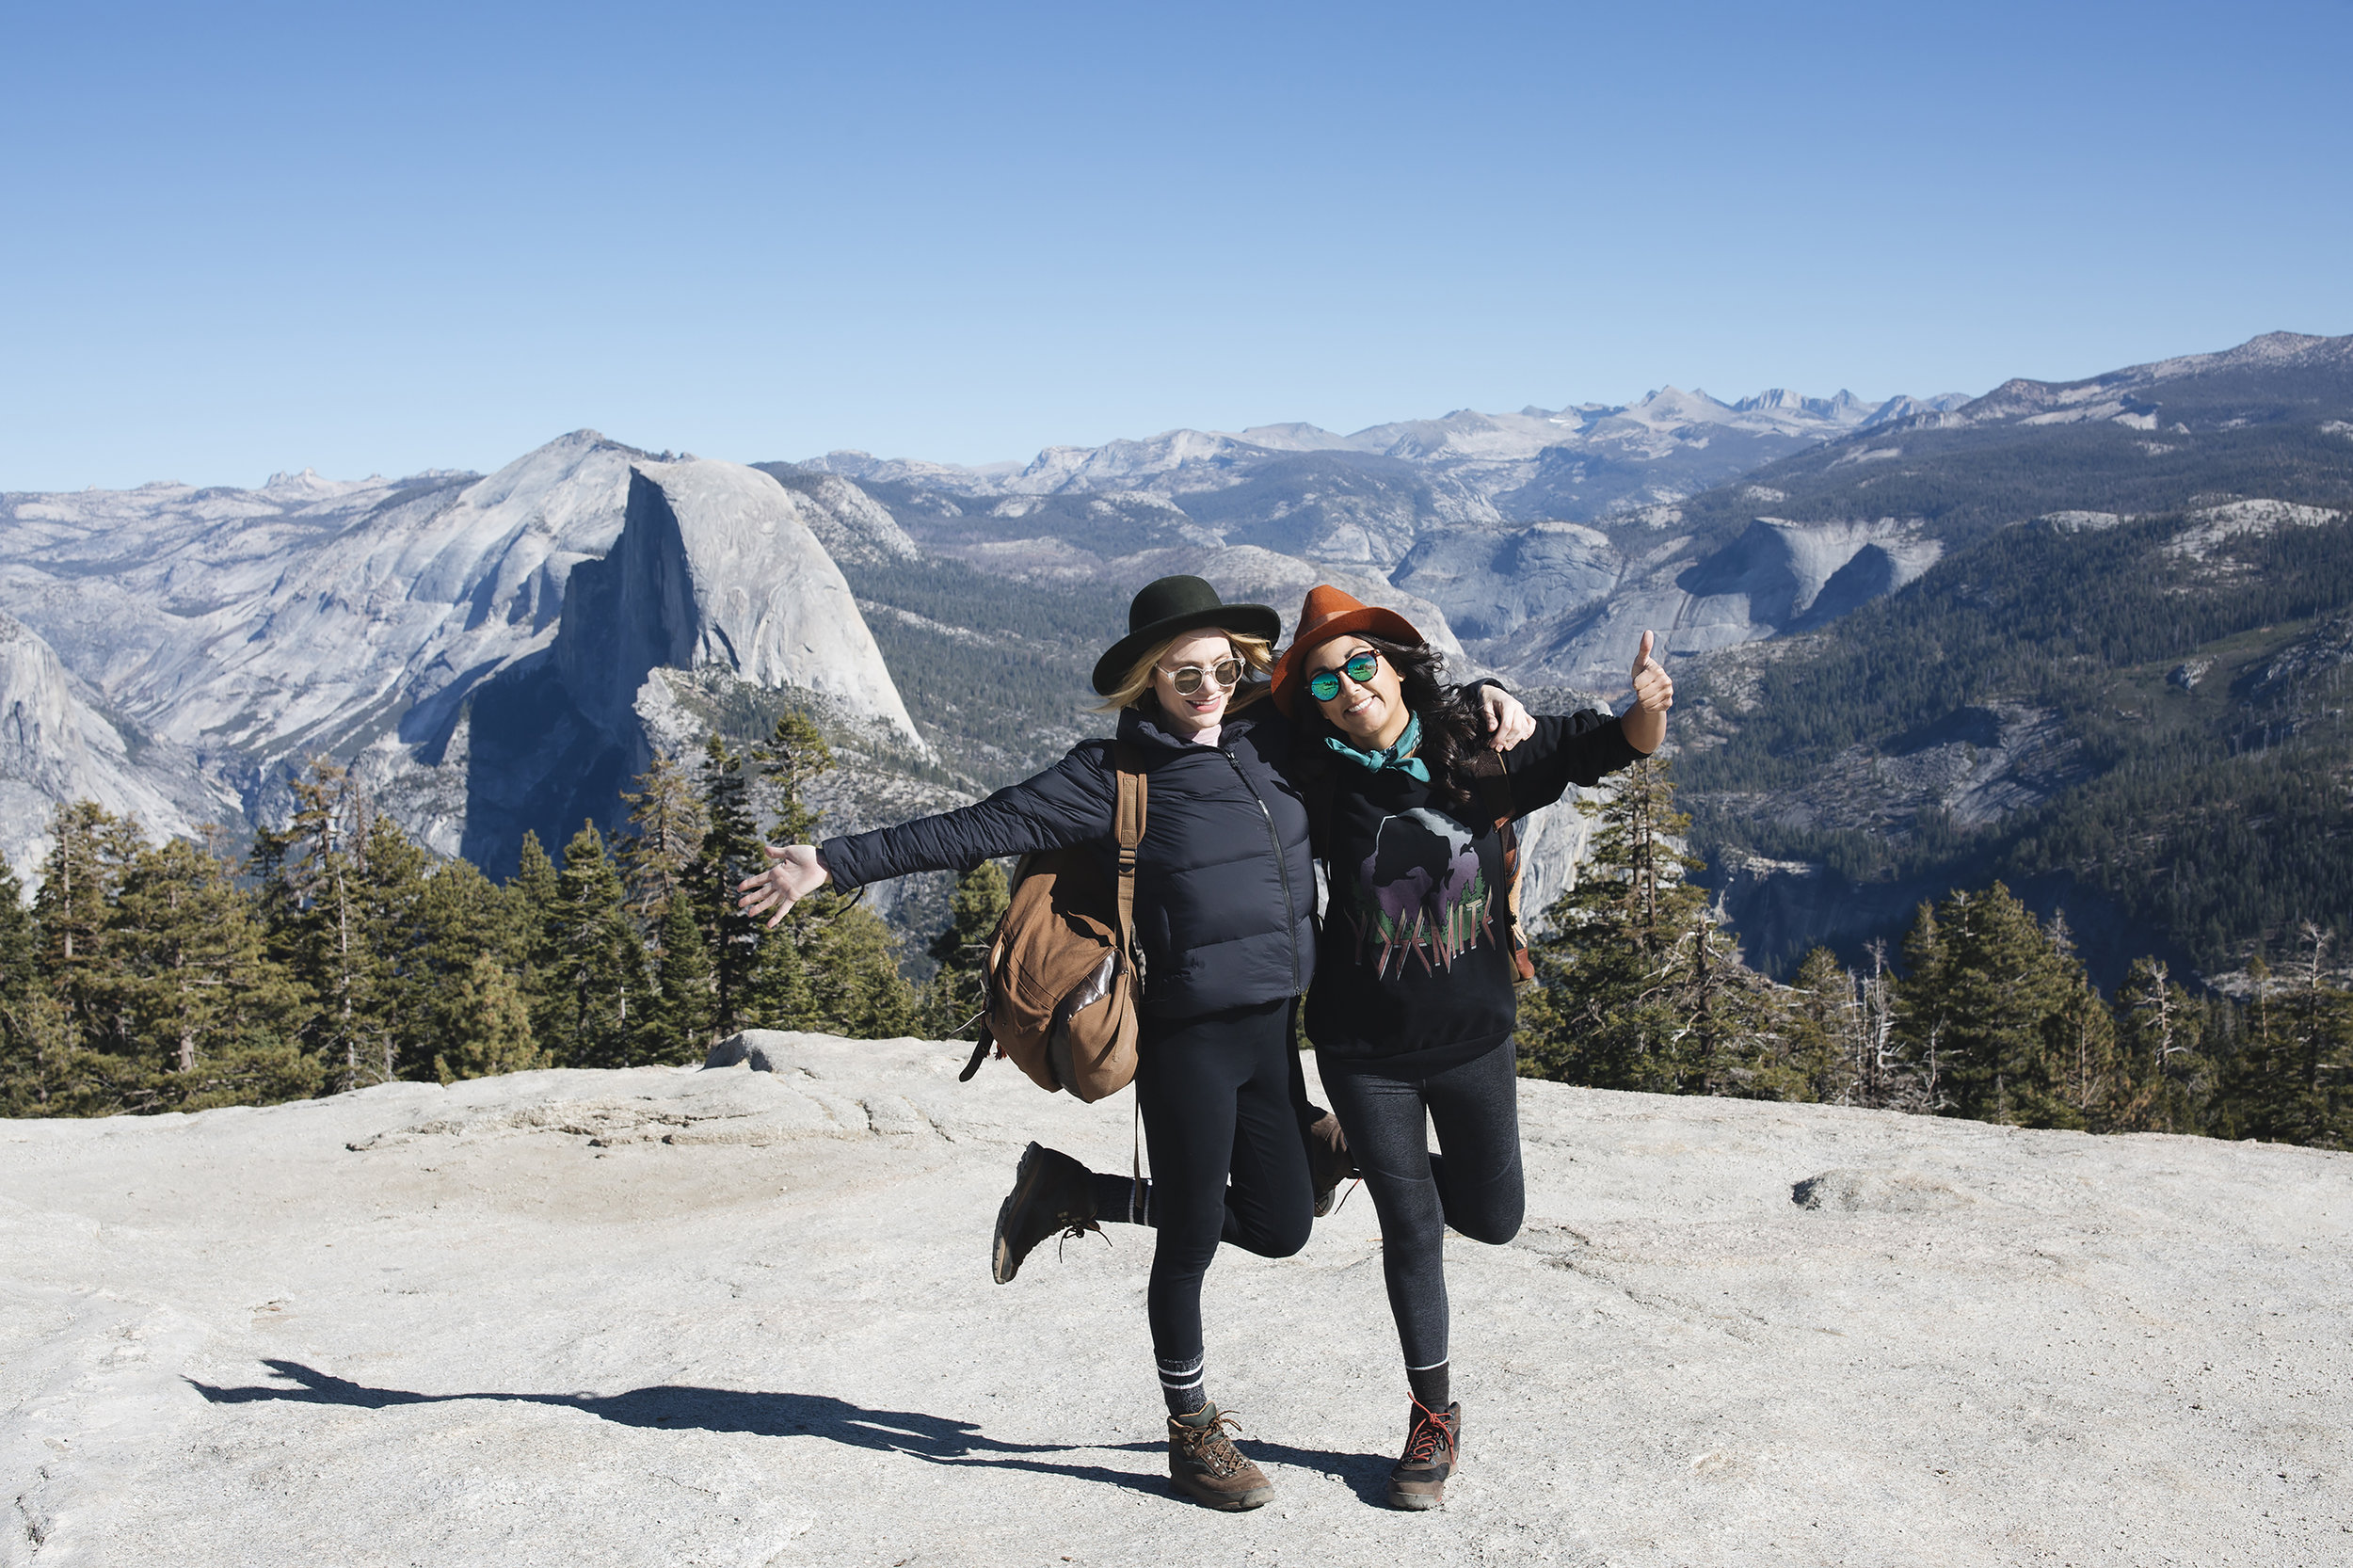 Hike Sentinel Dome to get an Amazing 360 Degree View of Yosemite